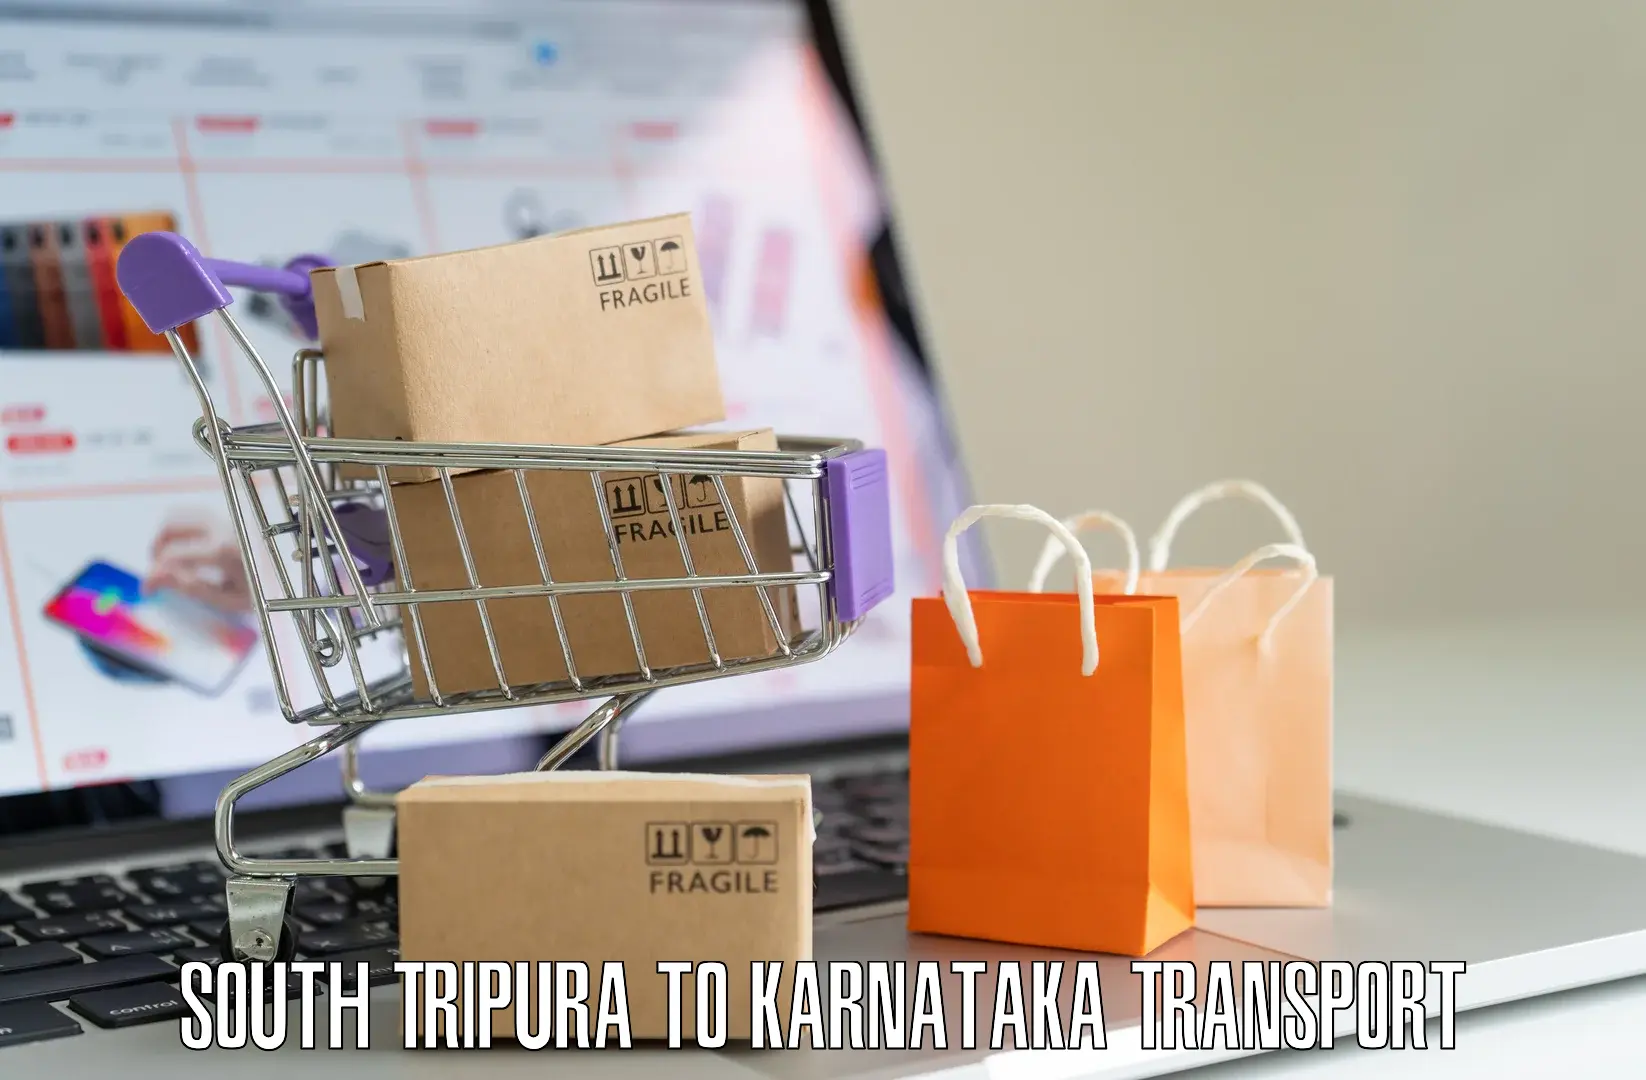 Delivery service South Tripura to Mulbagal